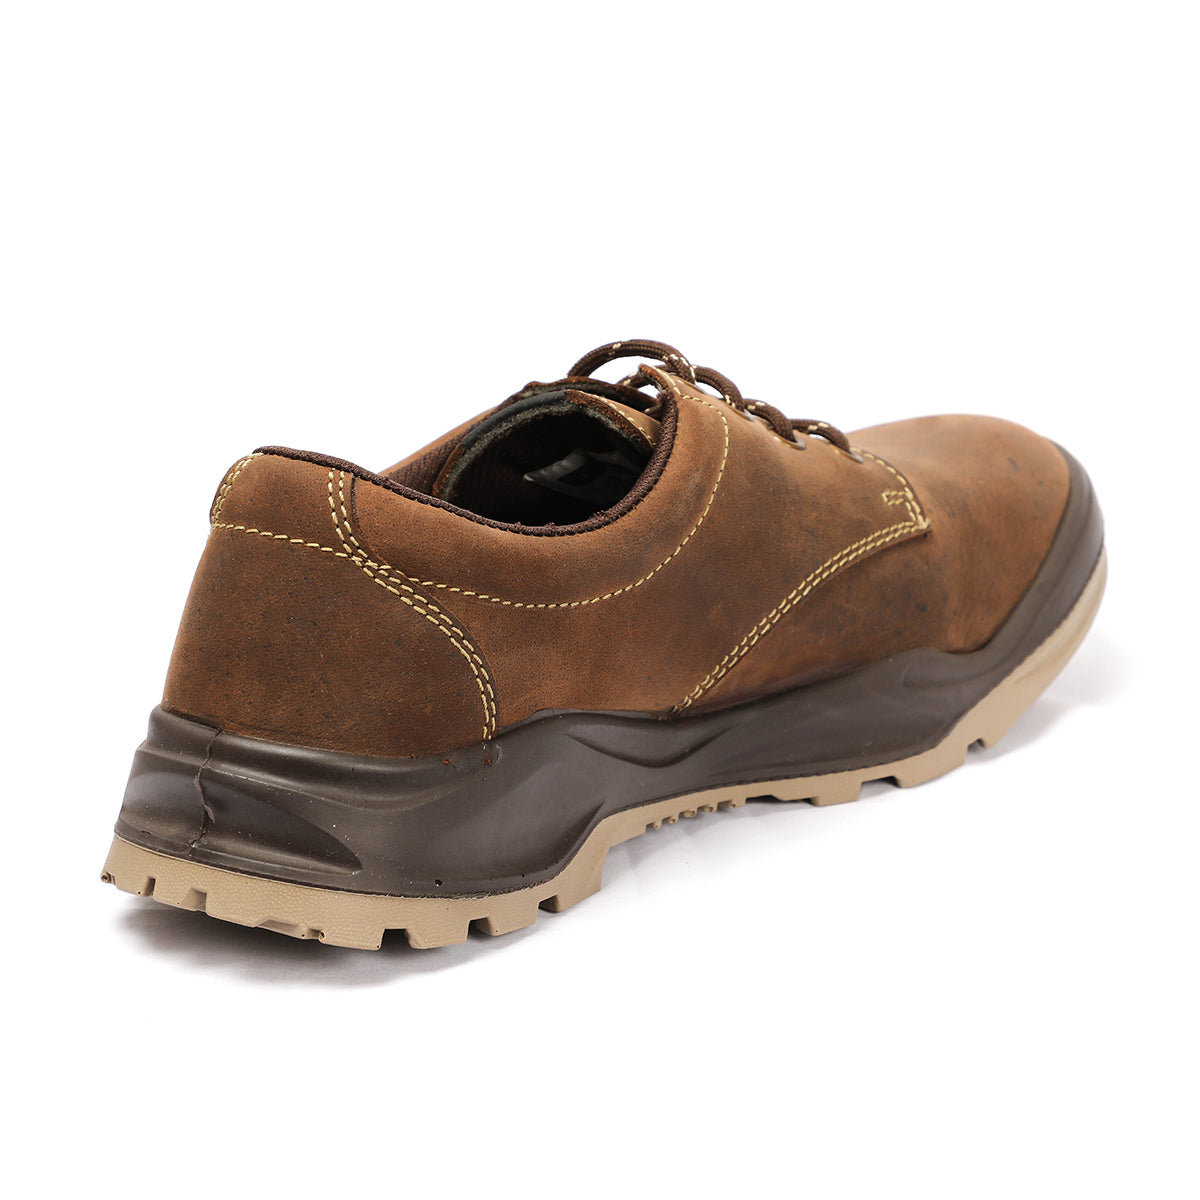 T Torp Ben 01 Safety Shoe water resistant brown colour